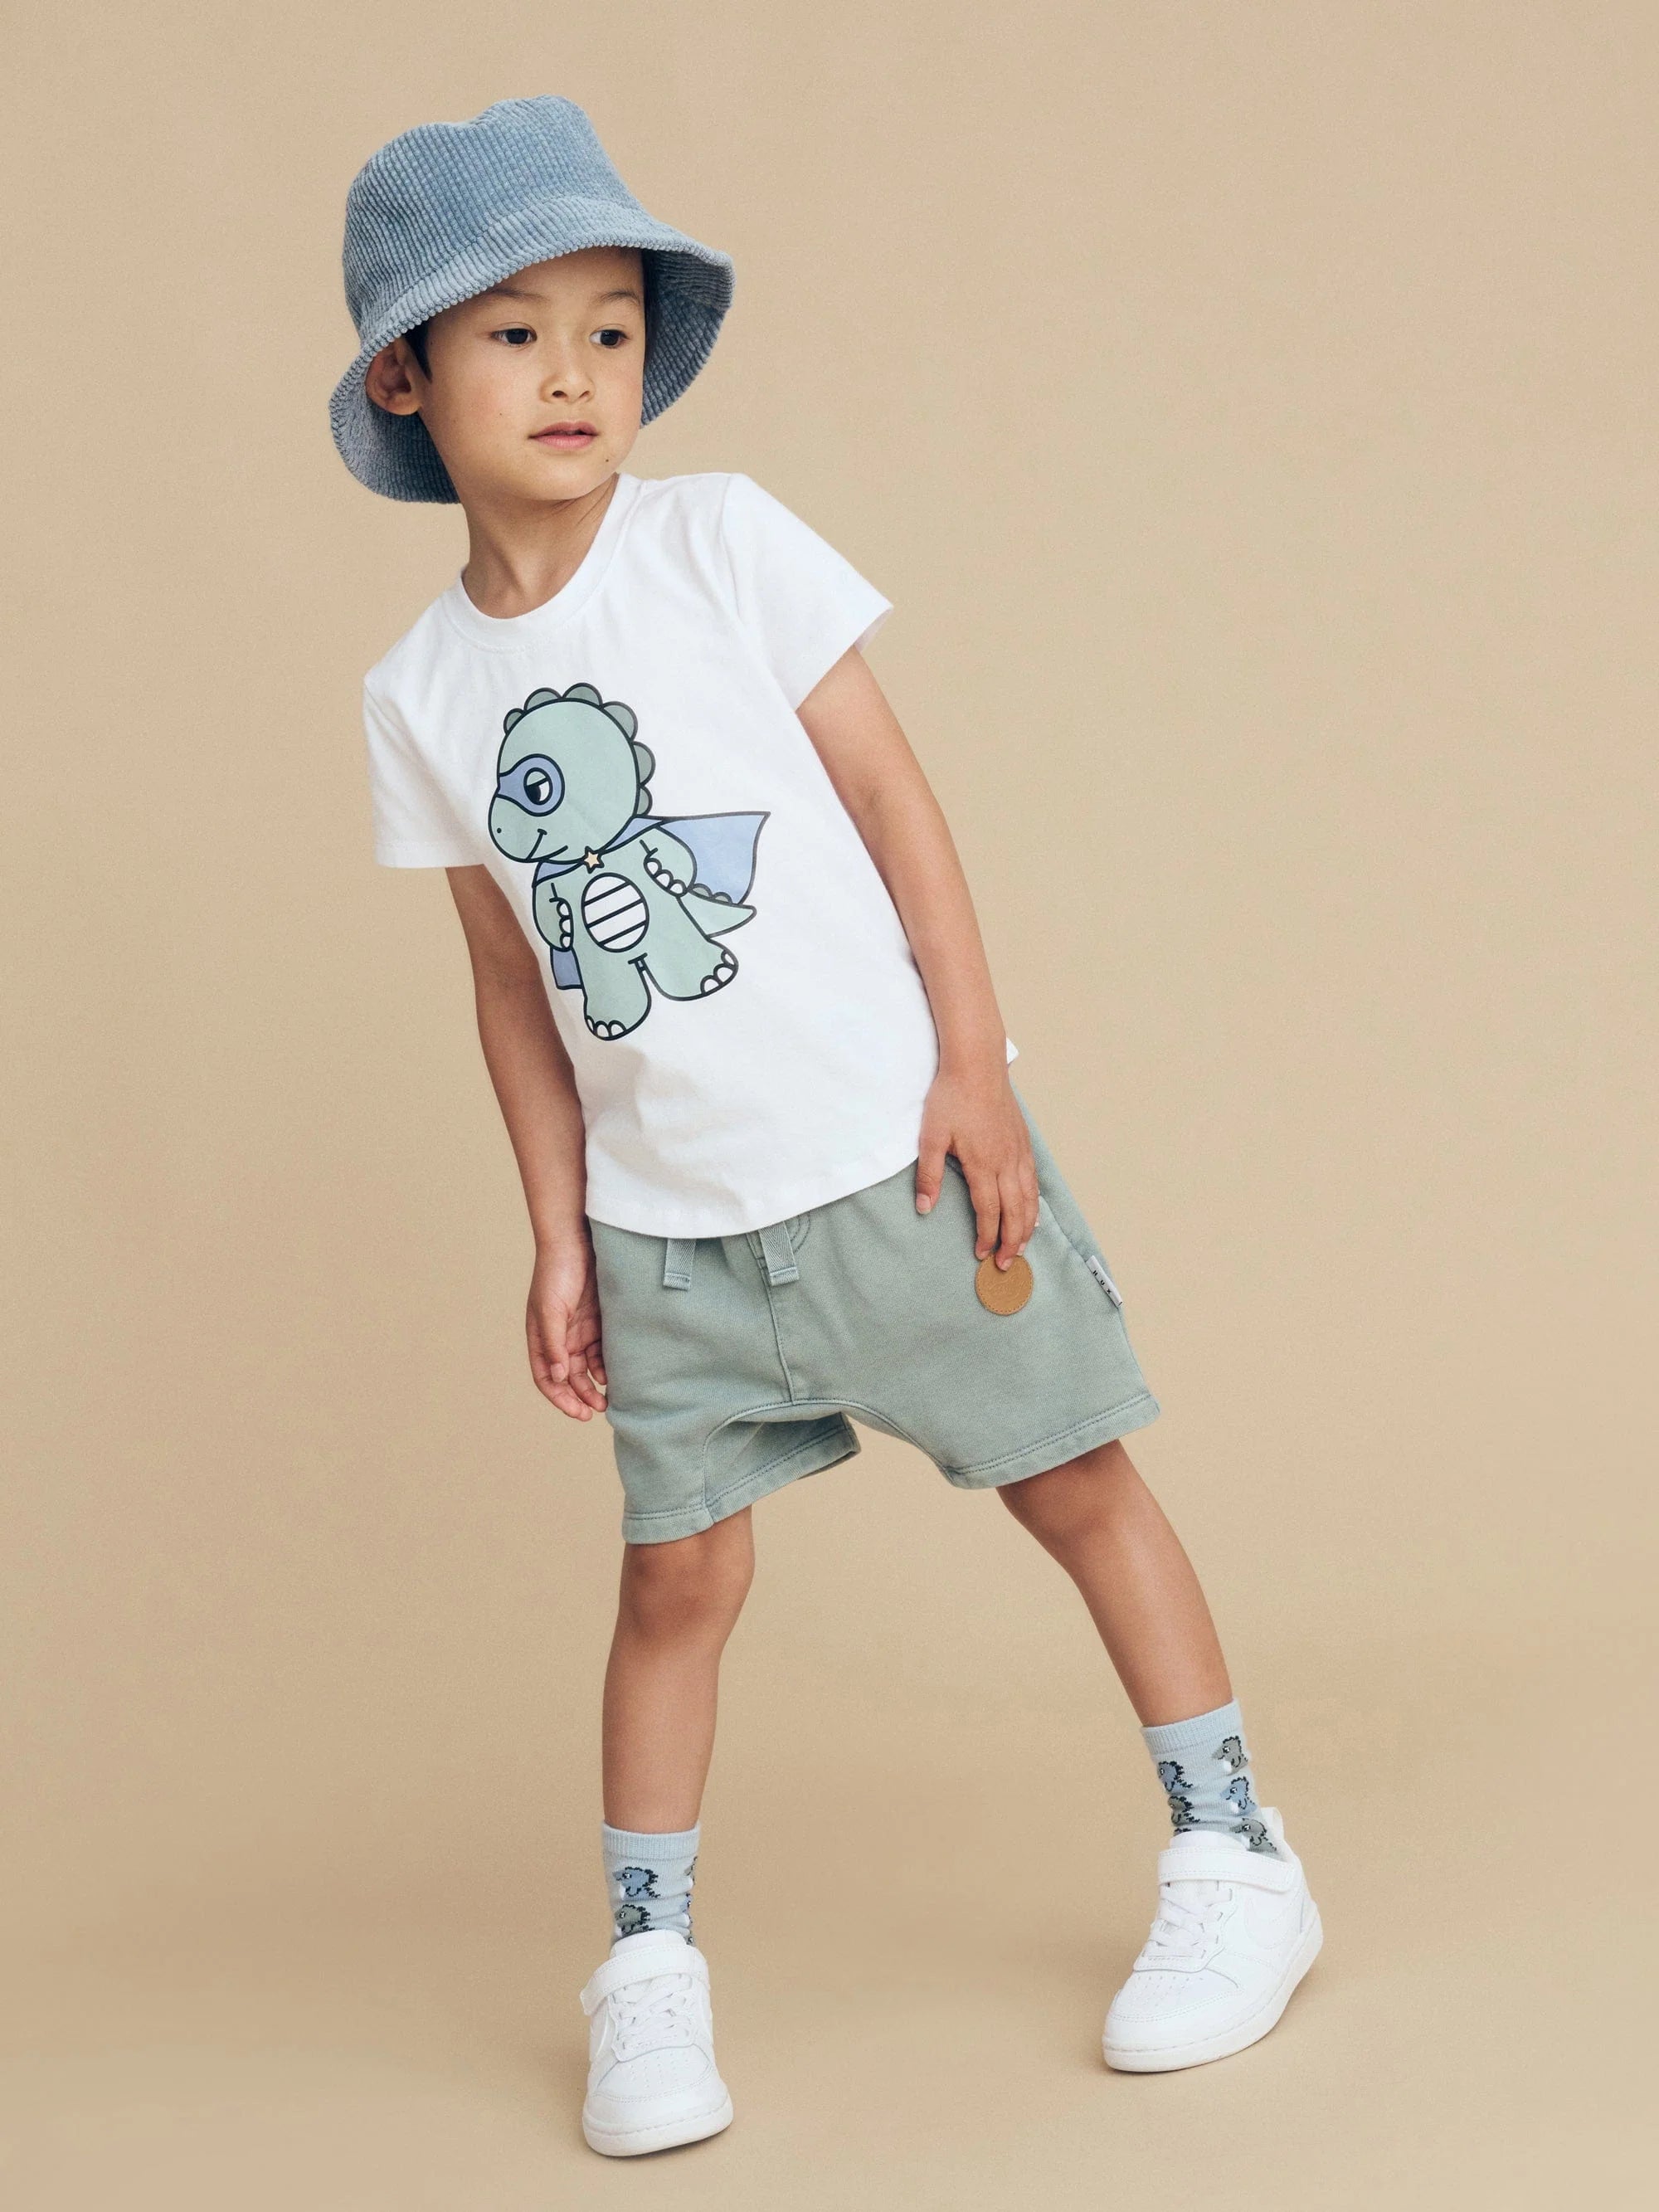 Huxbaby - Organic Baby Clothes Sustainable & Kids Clothing